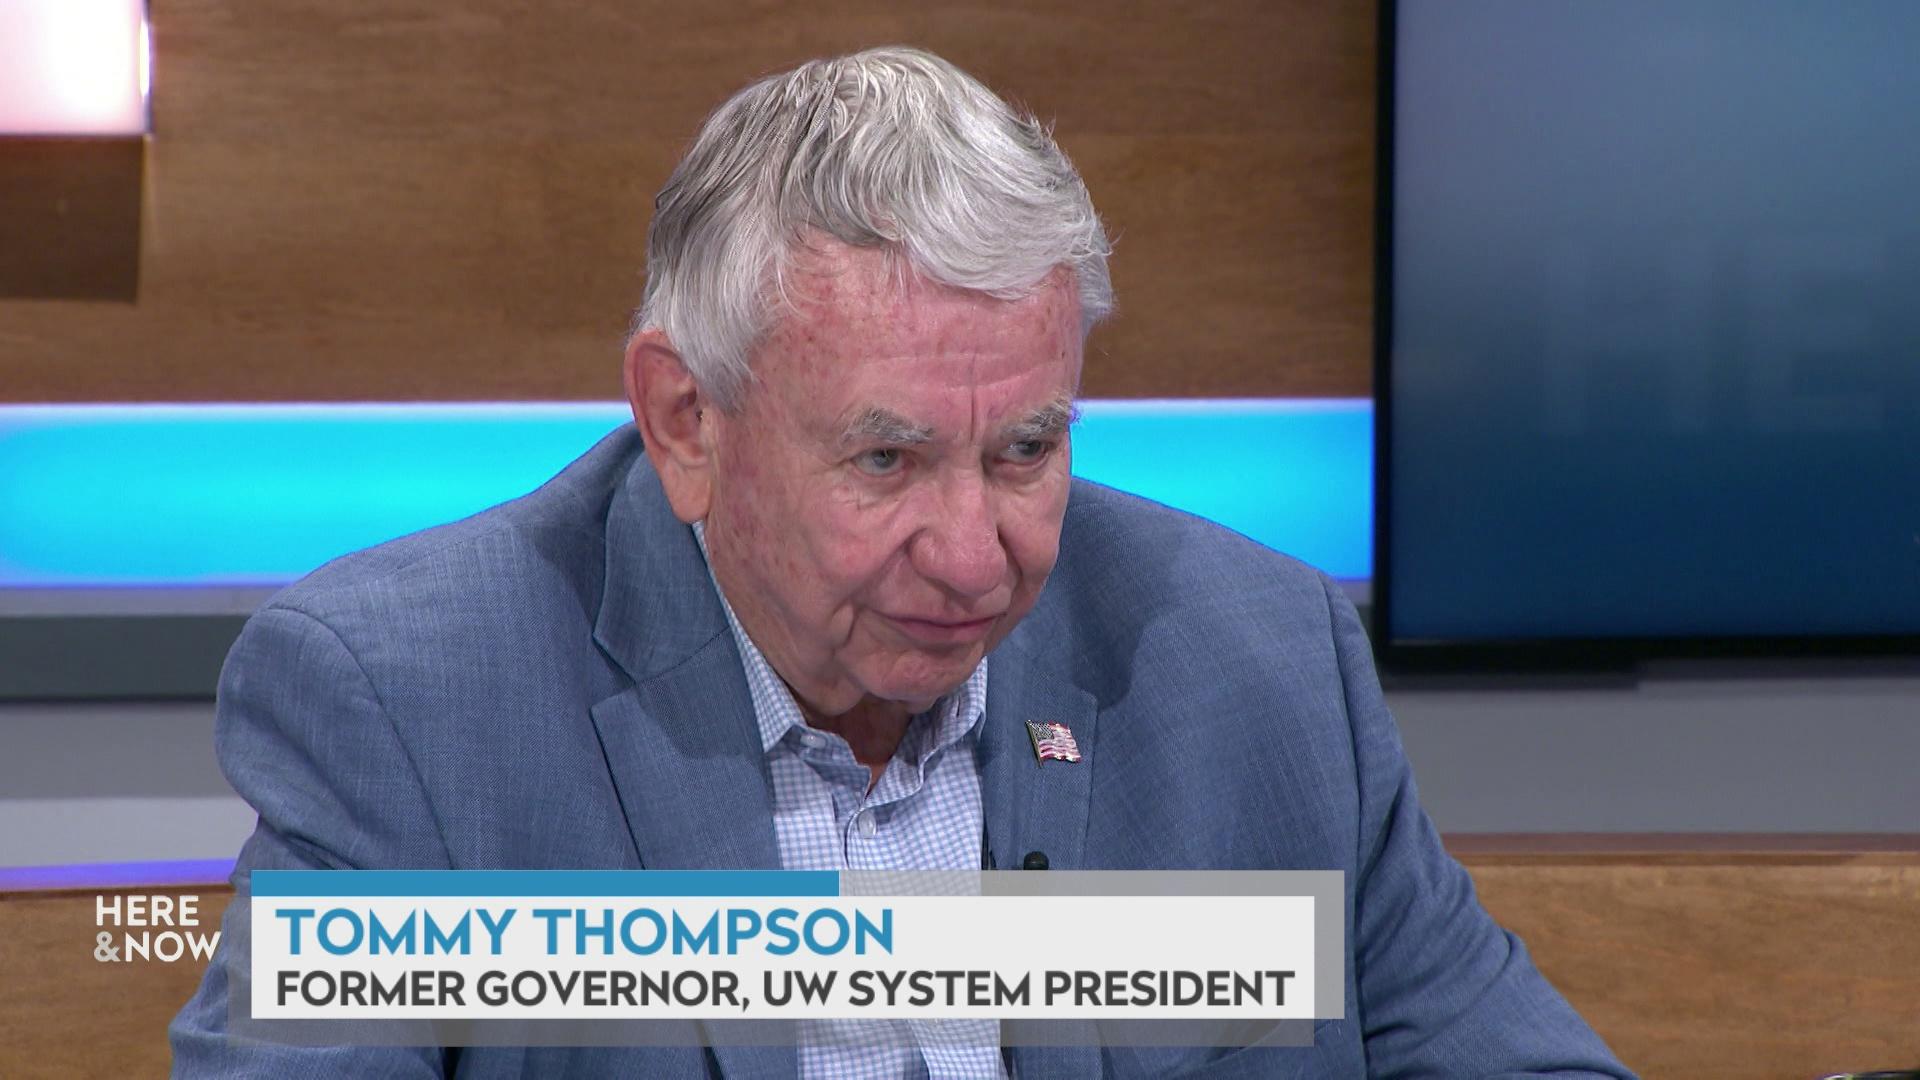 A still image shows Tommy Thompson seated at the 'Here & Now' set featuring wood paneling, with a graphic at bottom reading 'Tommy Thompson' and 'Former Governor, UW System President.'